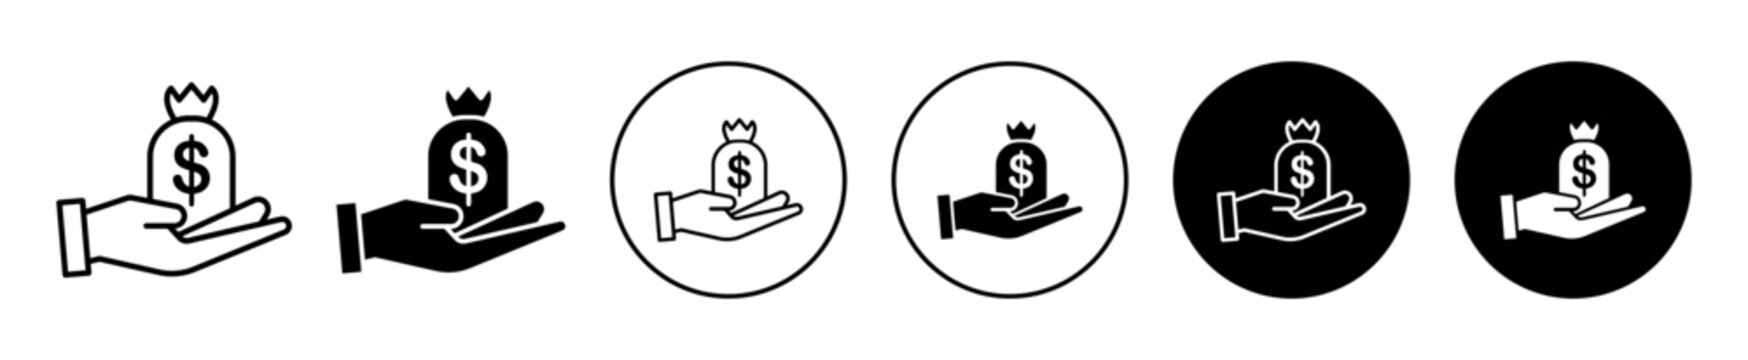 loan icon. easy instant credit home loan lending money. personal financial wealth vector set. bribe greed or business profit symbol. hand with dollar money bag sign. cash loan payment service icon